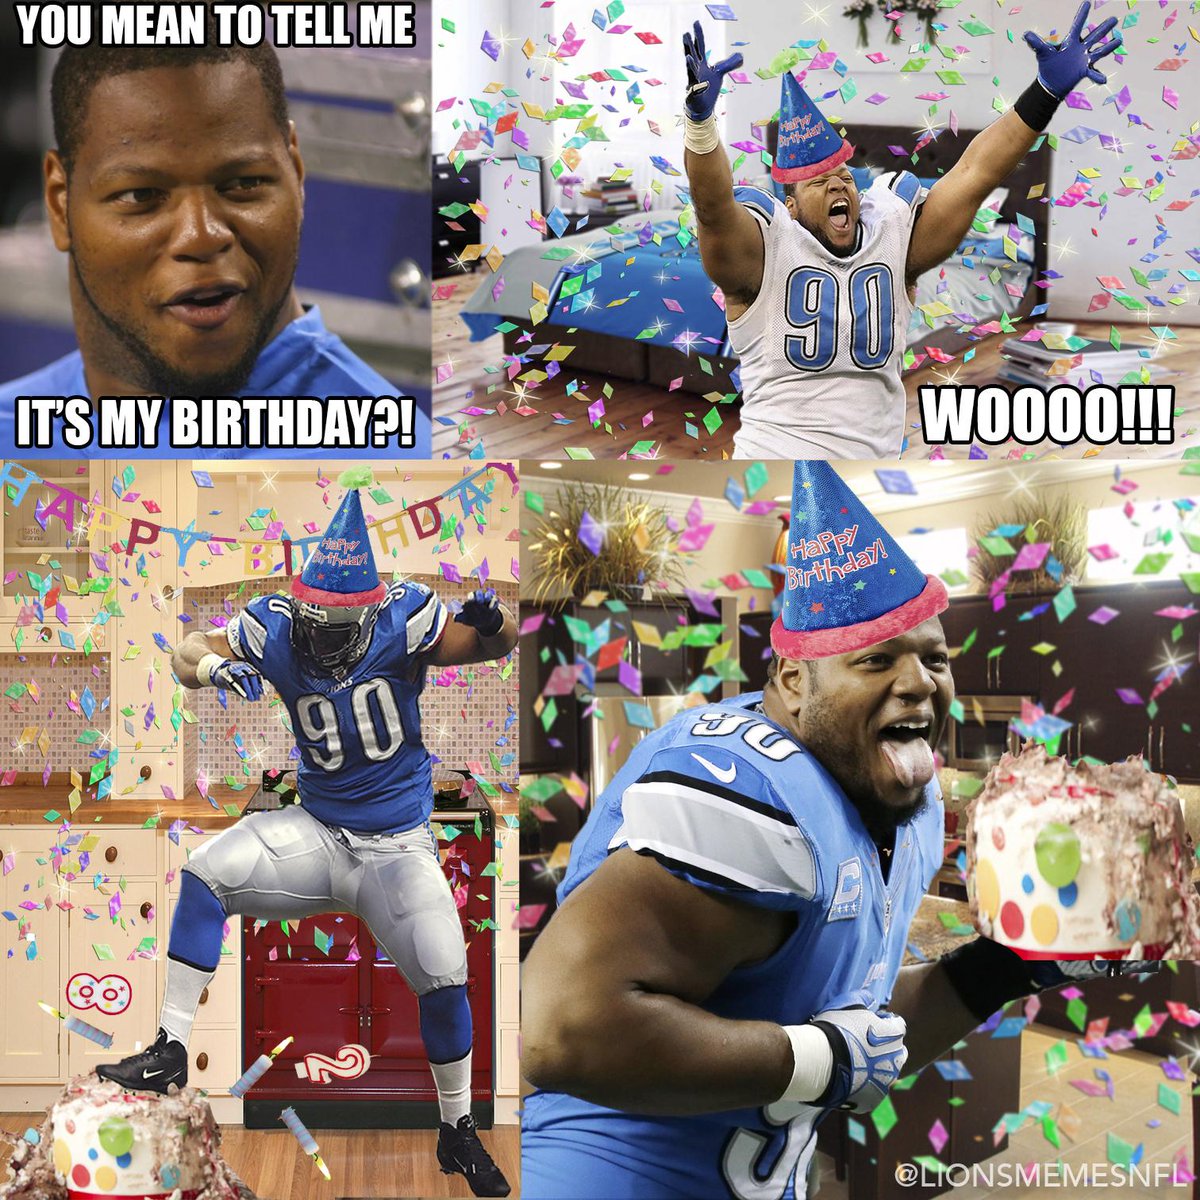 Detroit Lions Memes on X: Happy Opening Day, @tigers! #OneDetroit